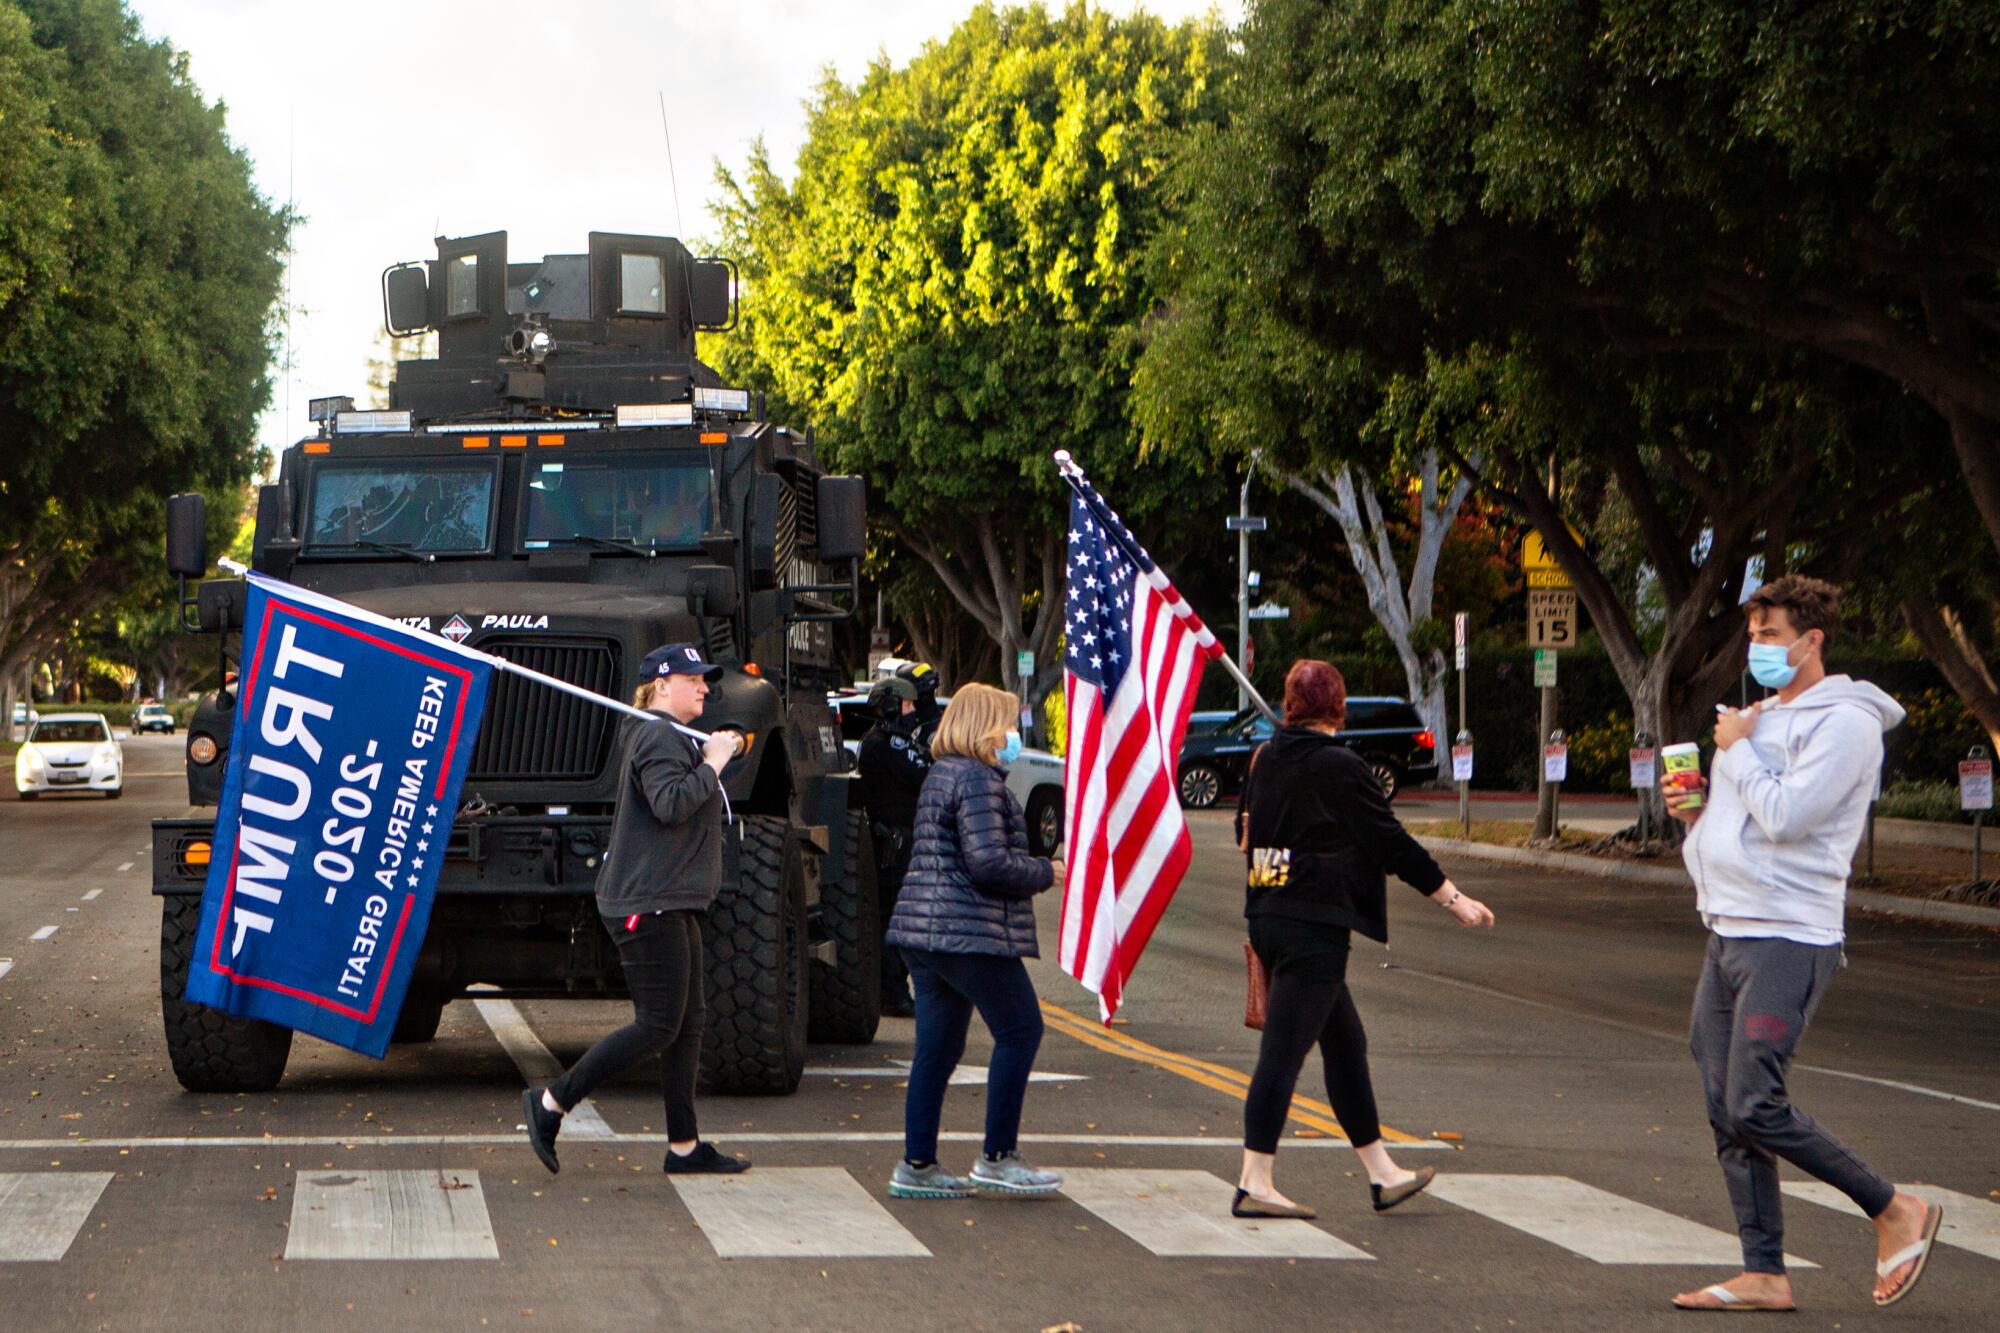 President Trump supporters walk past riot-control police vehicles on their way to a rally in Beverly Hills.